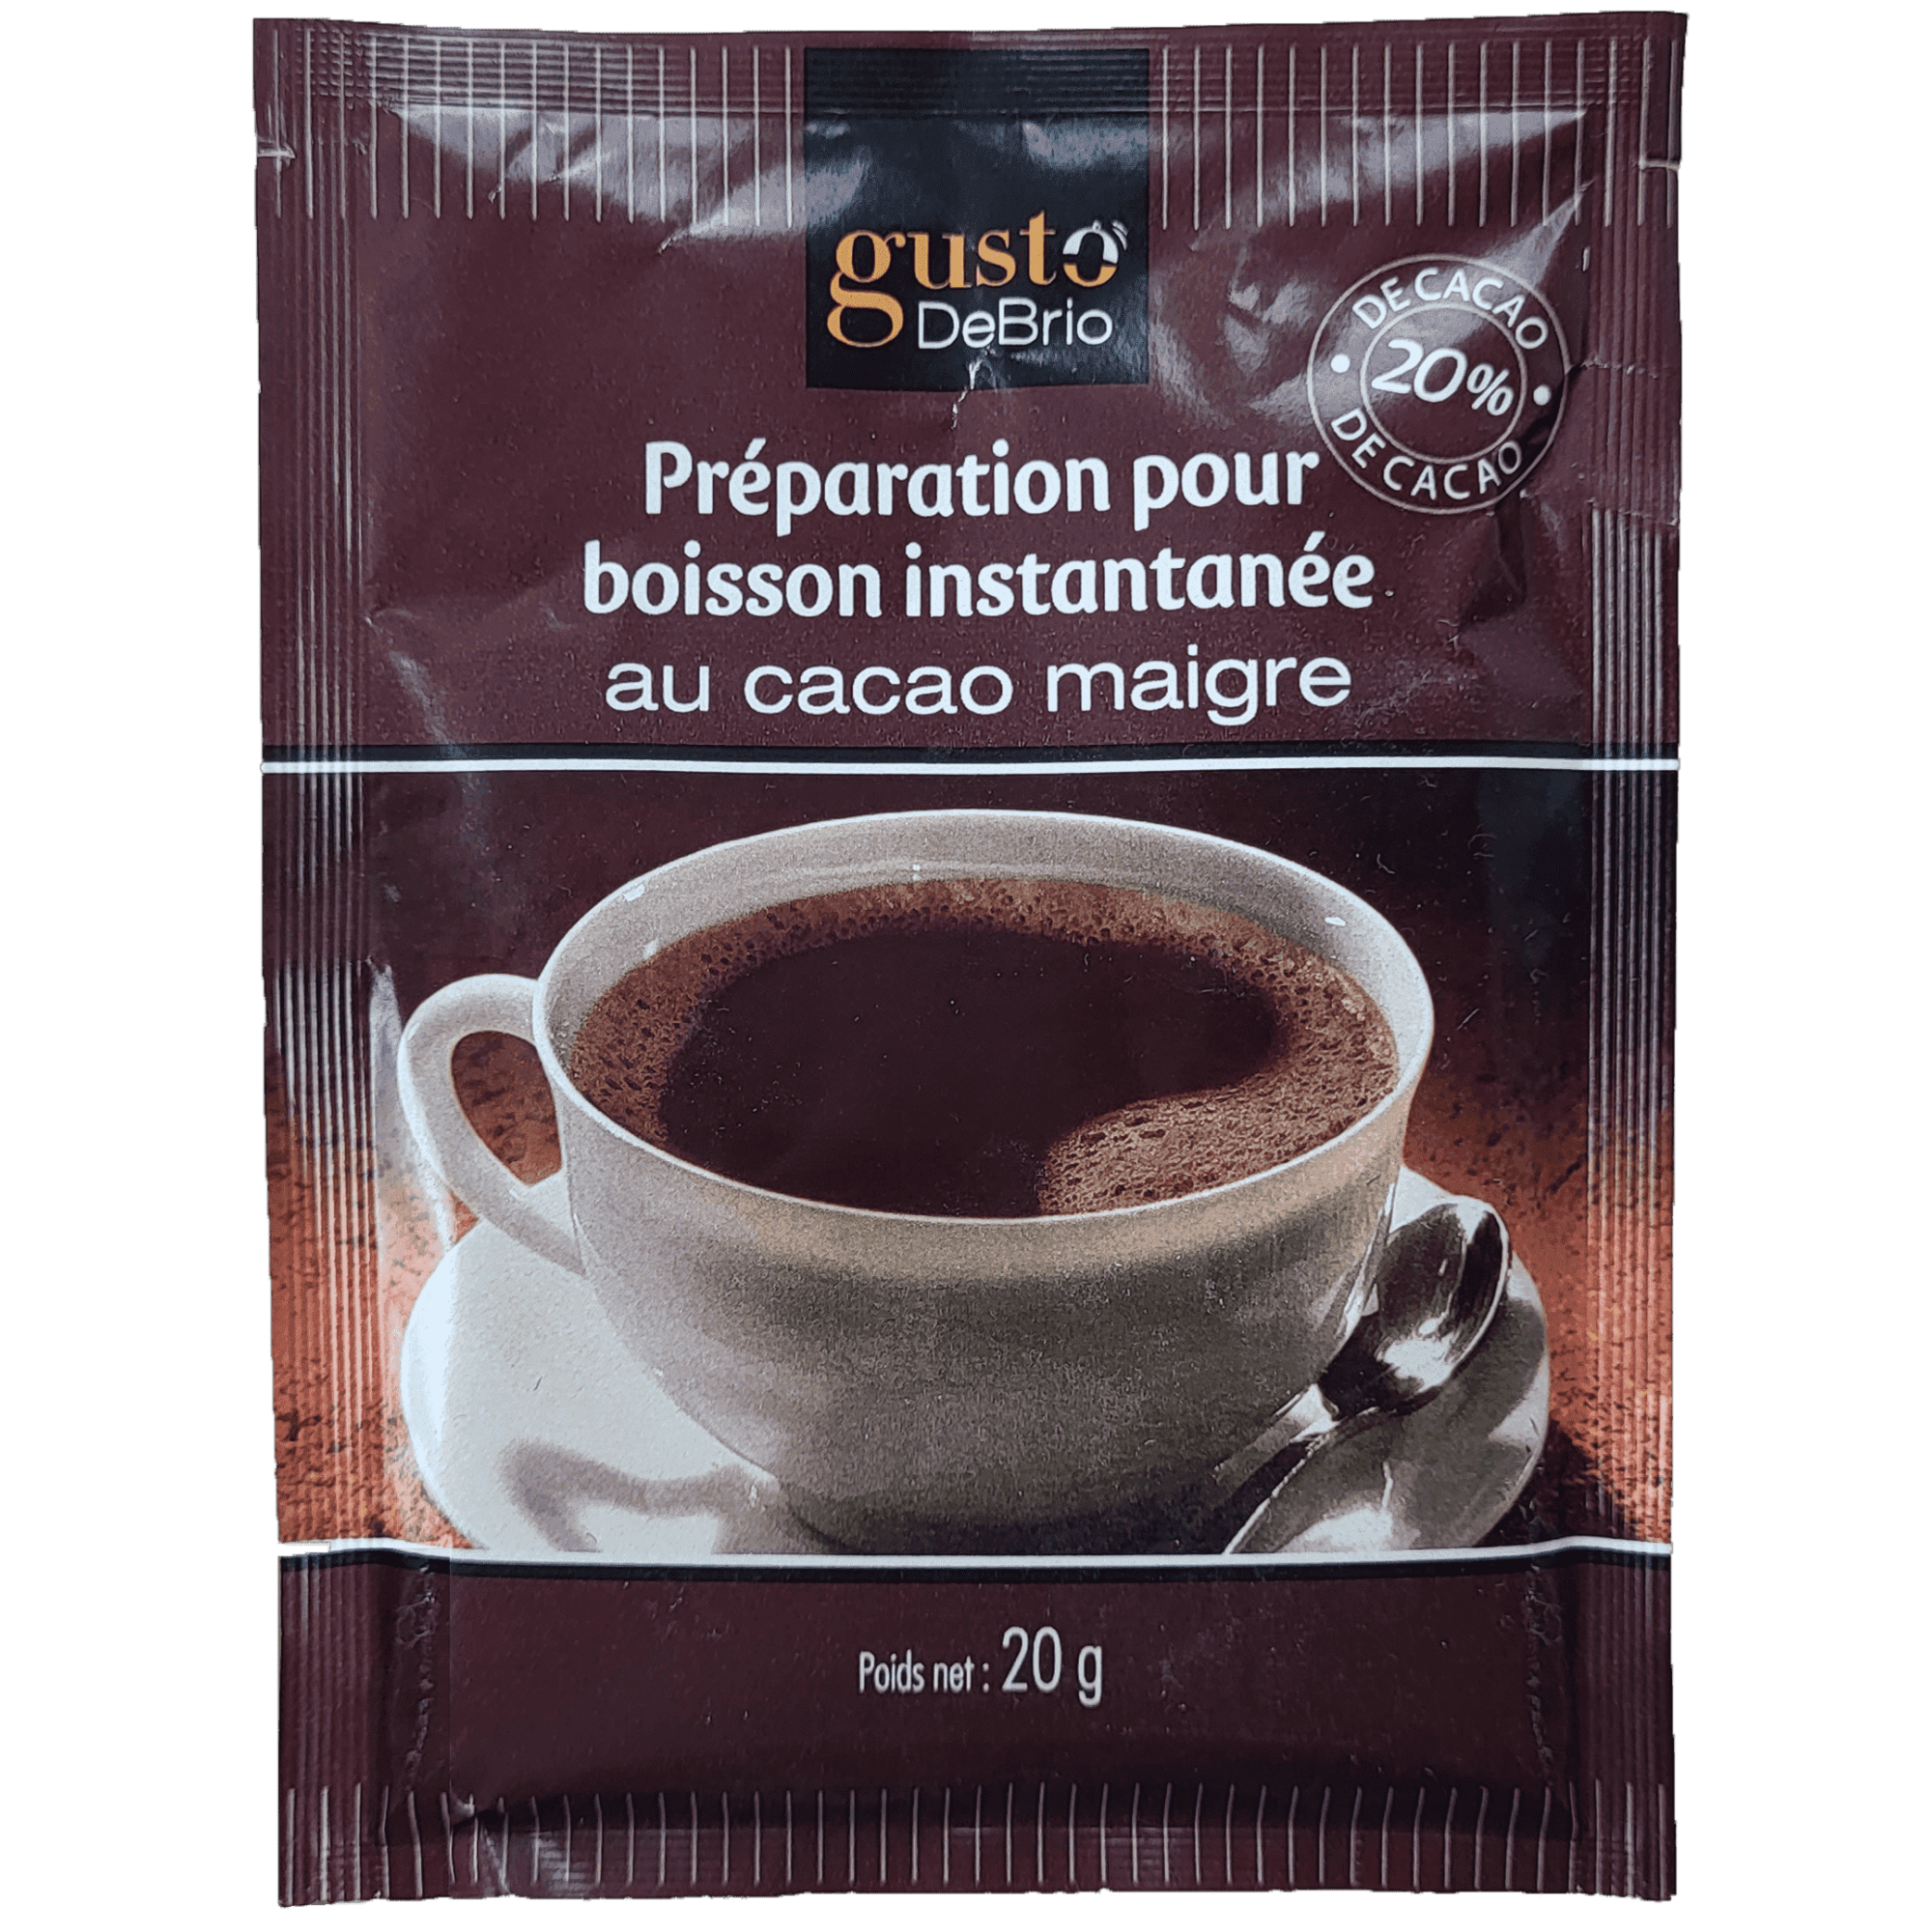 CHOCOLAT CHAUD DOSETTE INDIVIDUELLE Comparer les prix de CHOCOLAT CHAUD  DOSETTE INDIVIDUELLE sur Hellopro.fr